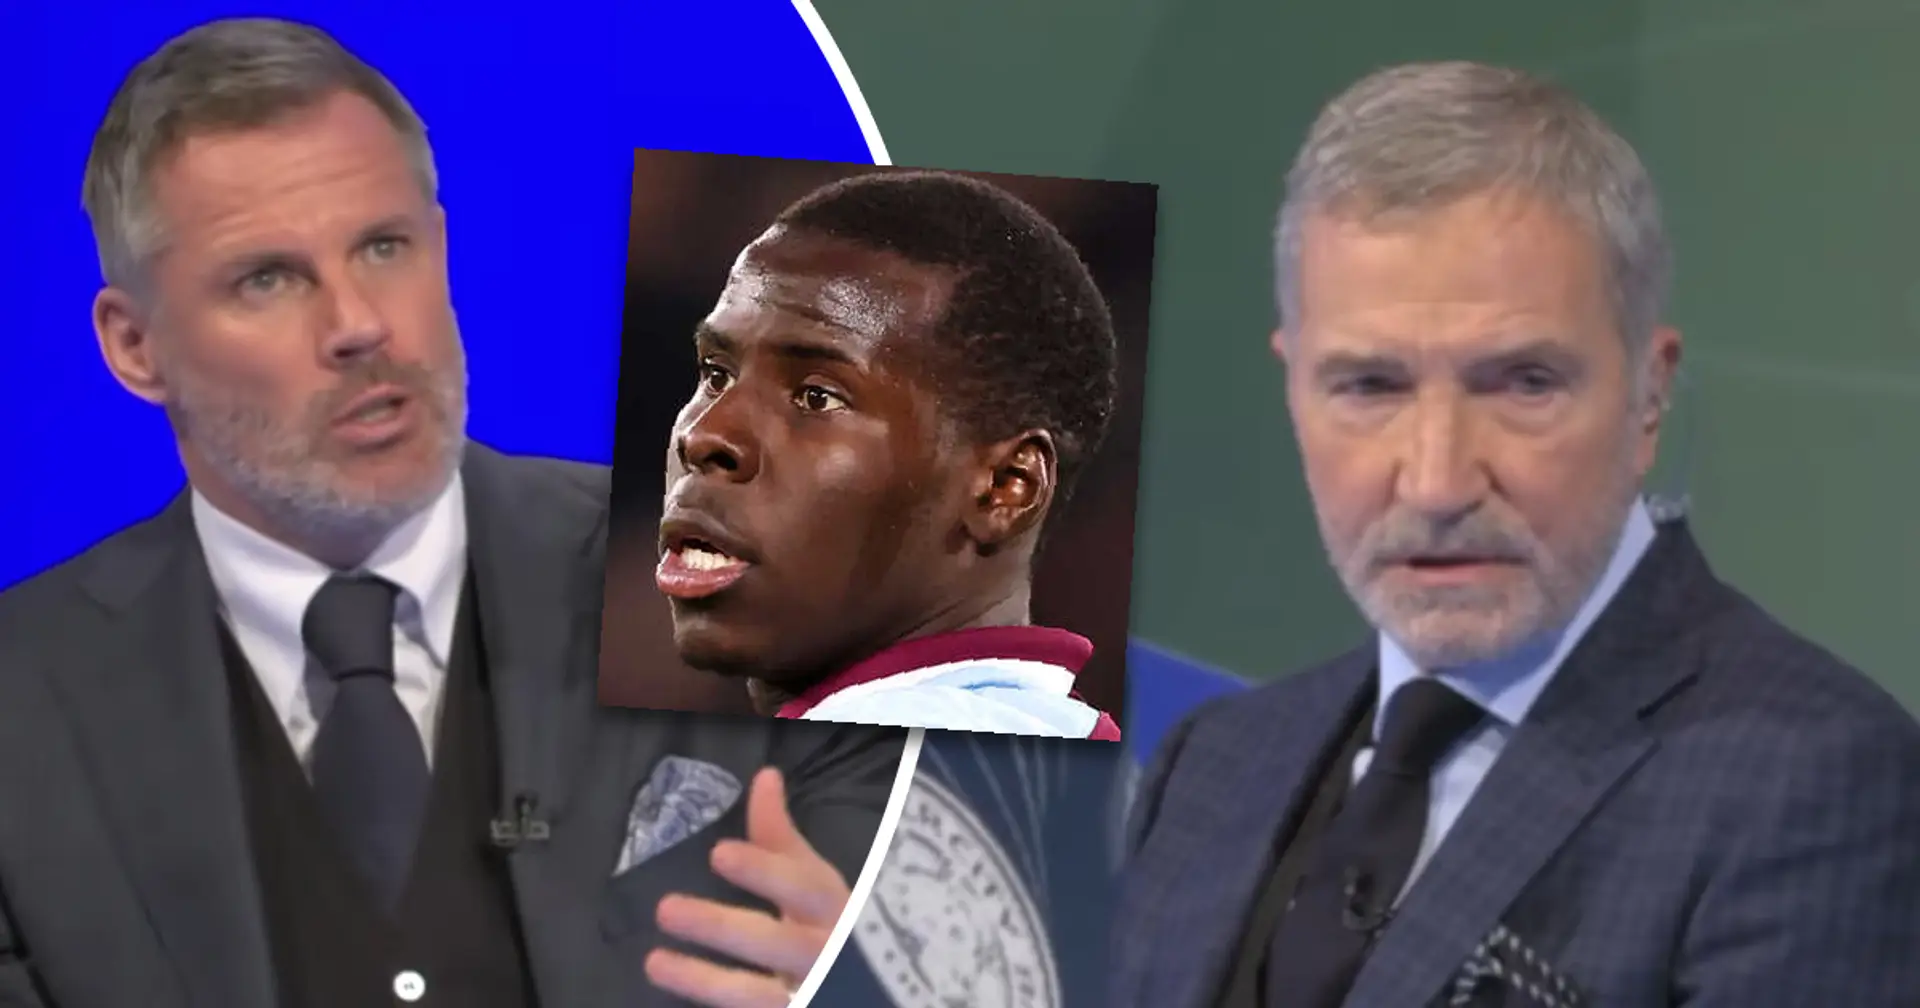 Carragher tries to defend cat-kicker Zouma, Souness gives perfect response